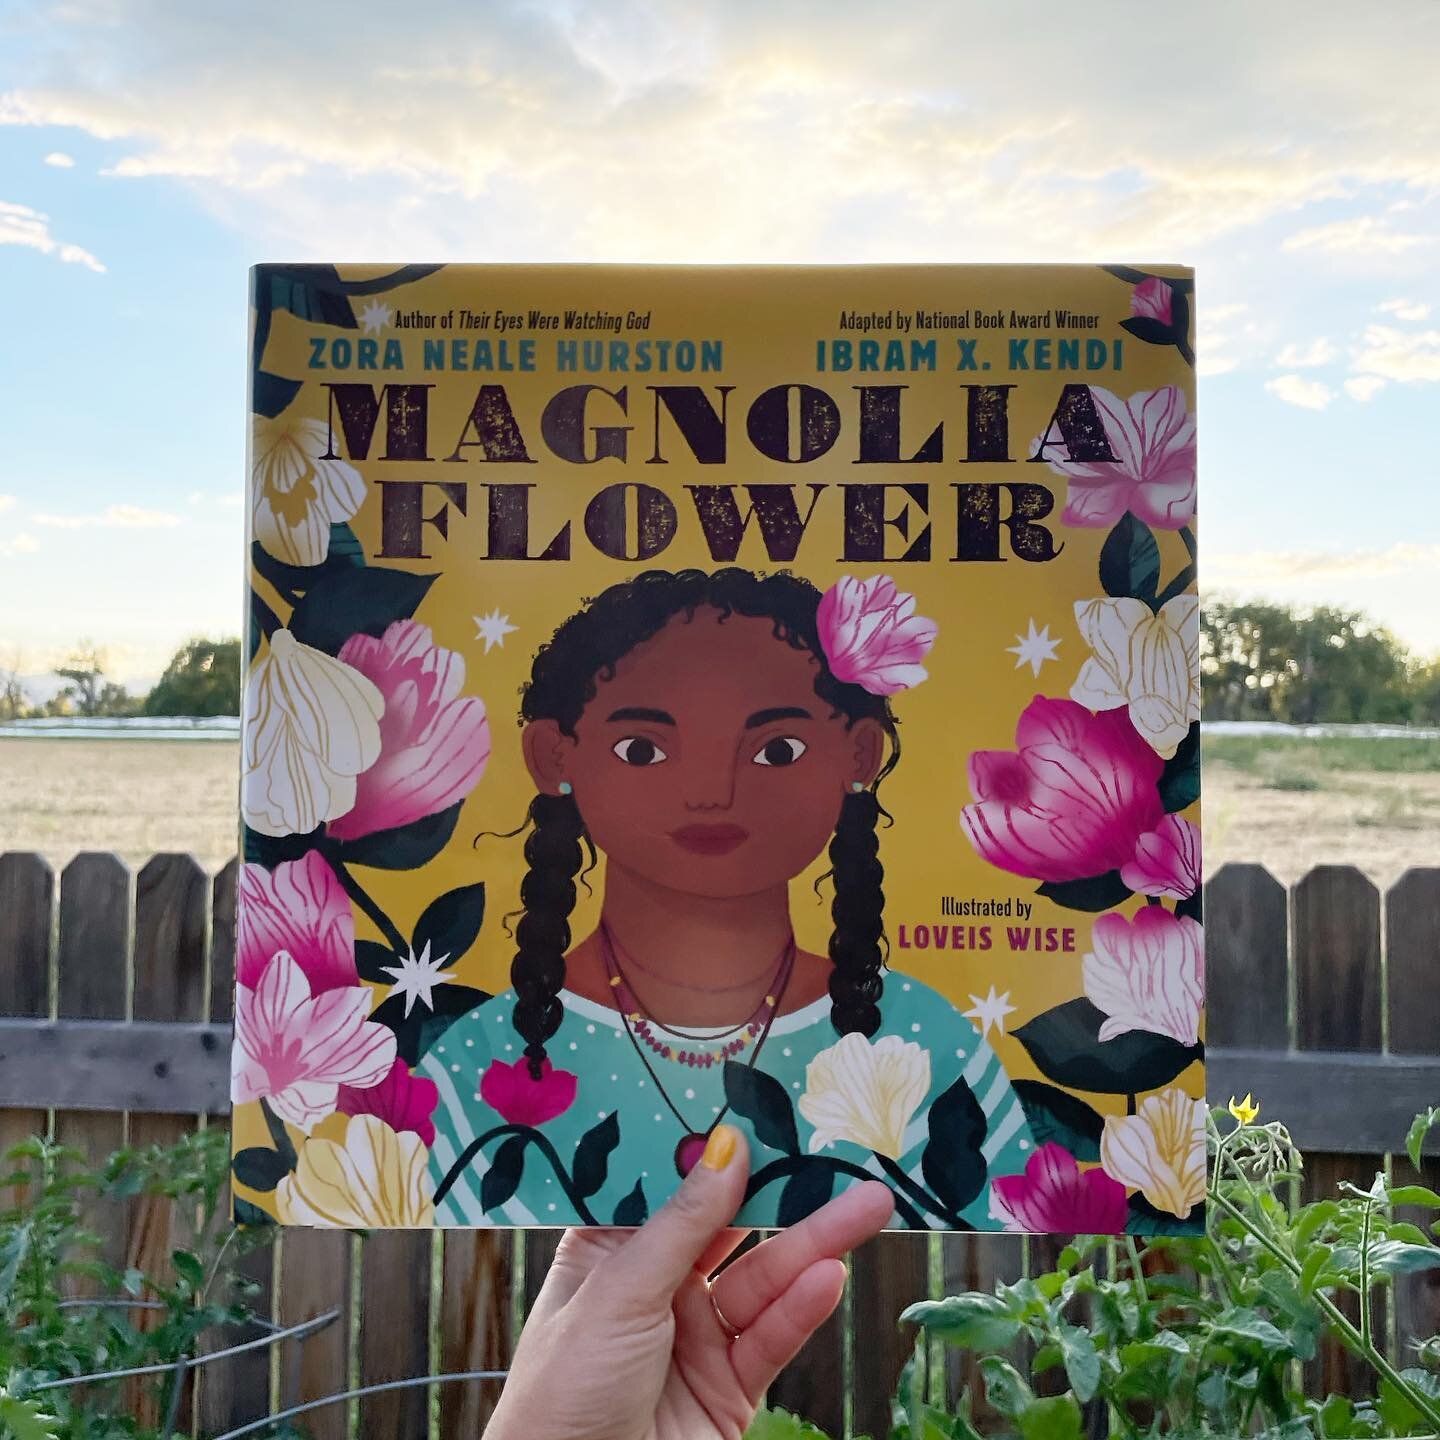 Zora Neale Hurston was a novelist, folklorist, and anthropologist.  One of America's preeminent writers, Hurston's body of work includes numerous short stories and today we are thrilled to share a children's adaptation of one, MAGNOLIA FLOWER.

Origi